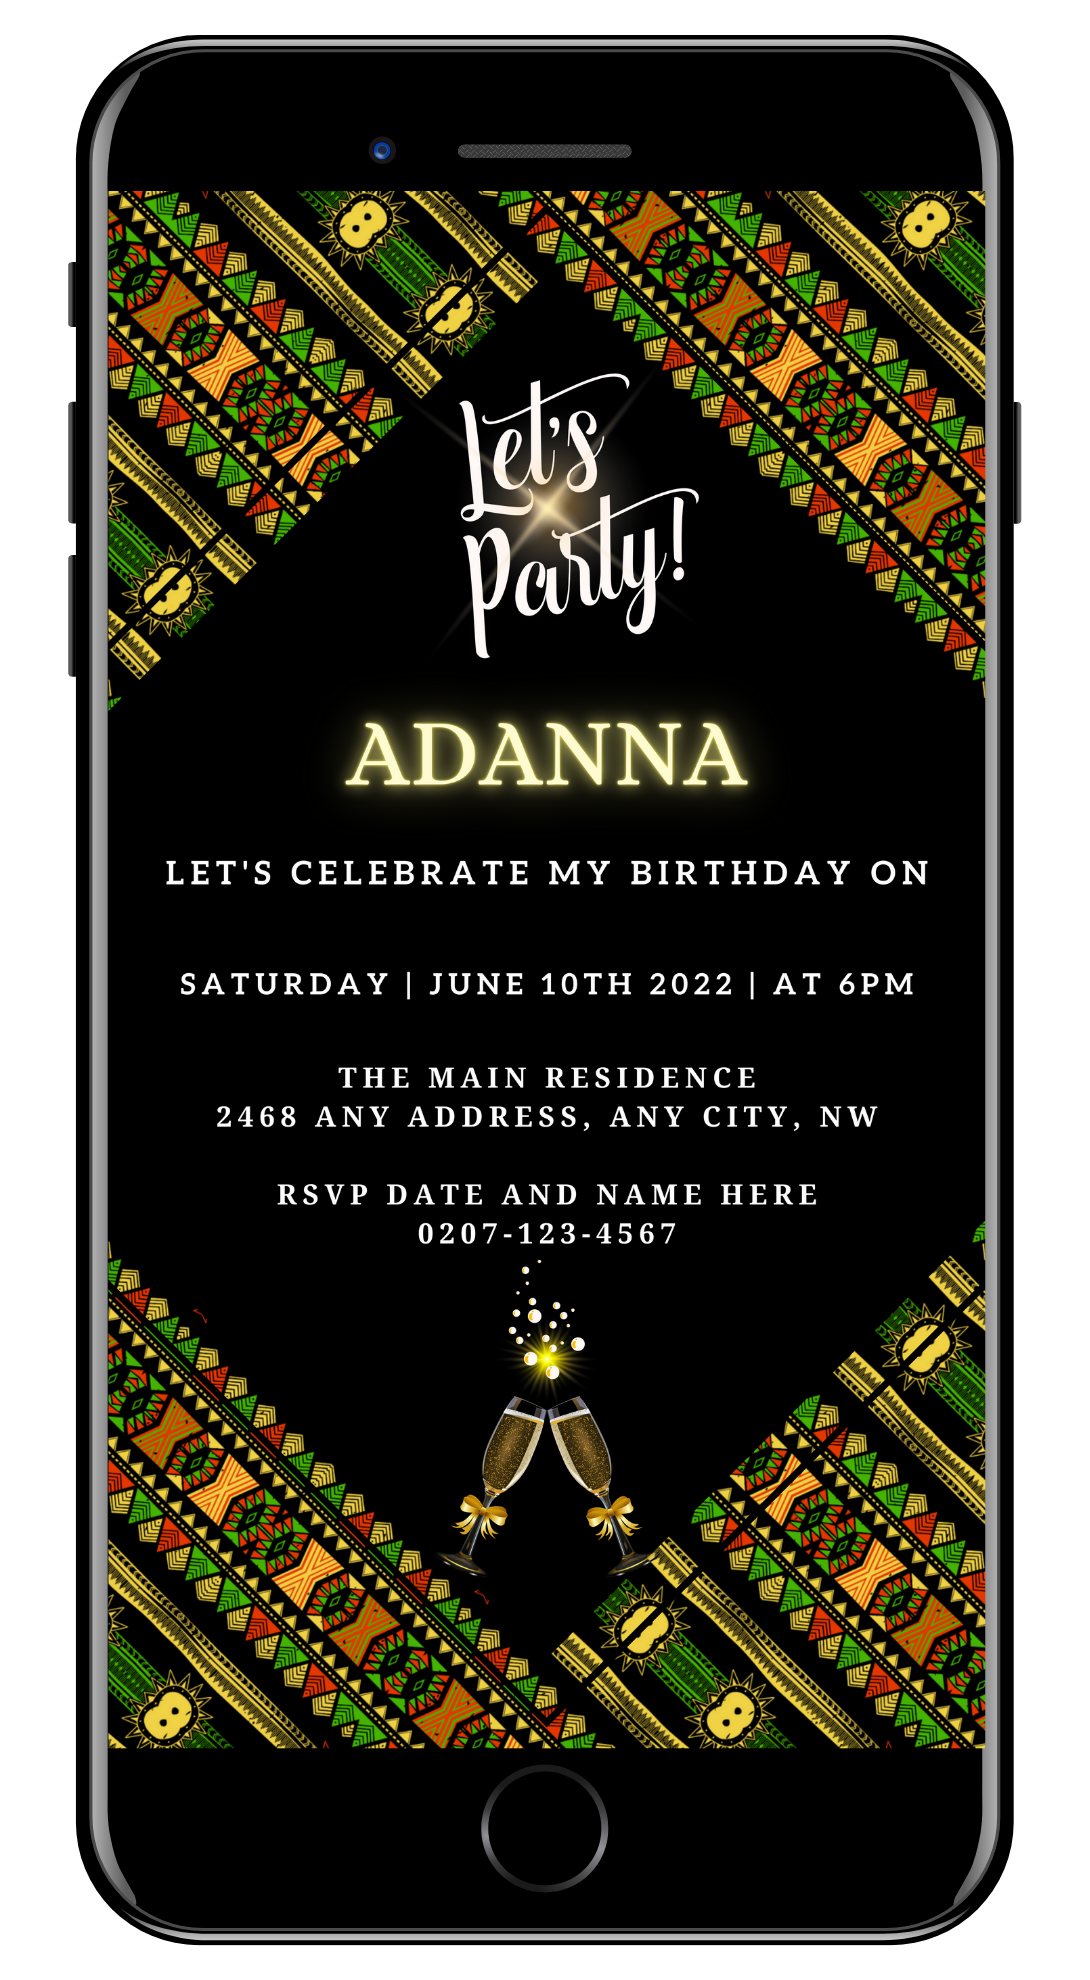 Digital invitation template for a party, displaying a customizable Green Black African Ankara design, editable via Canva for easy personalization and electronic sharing.